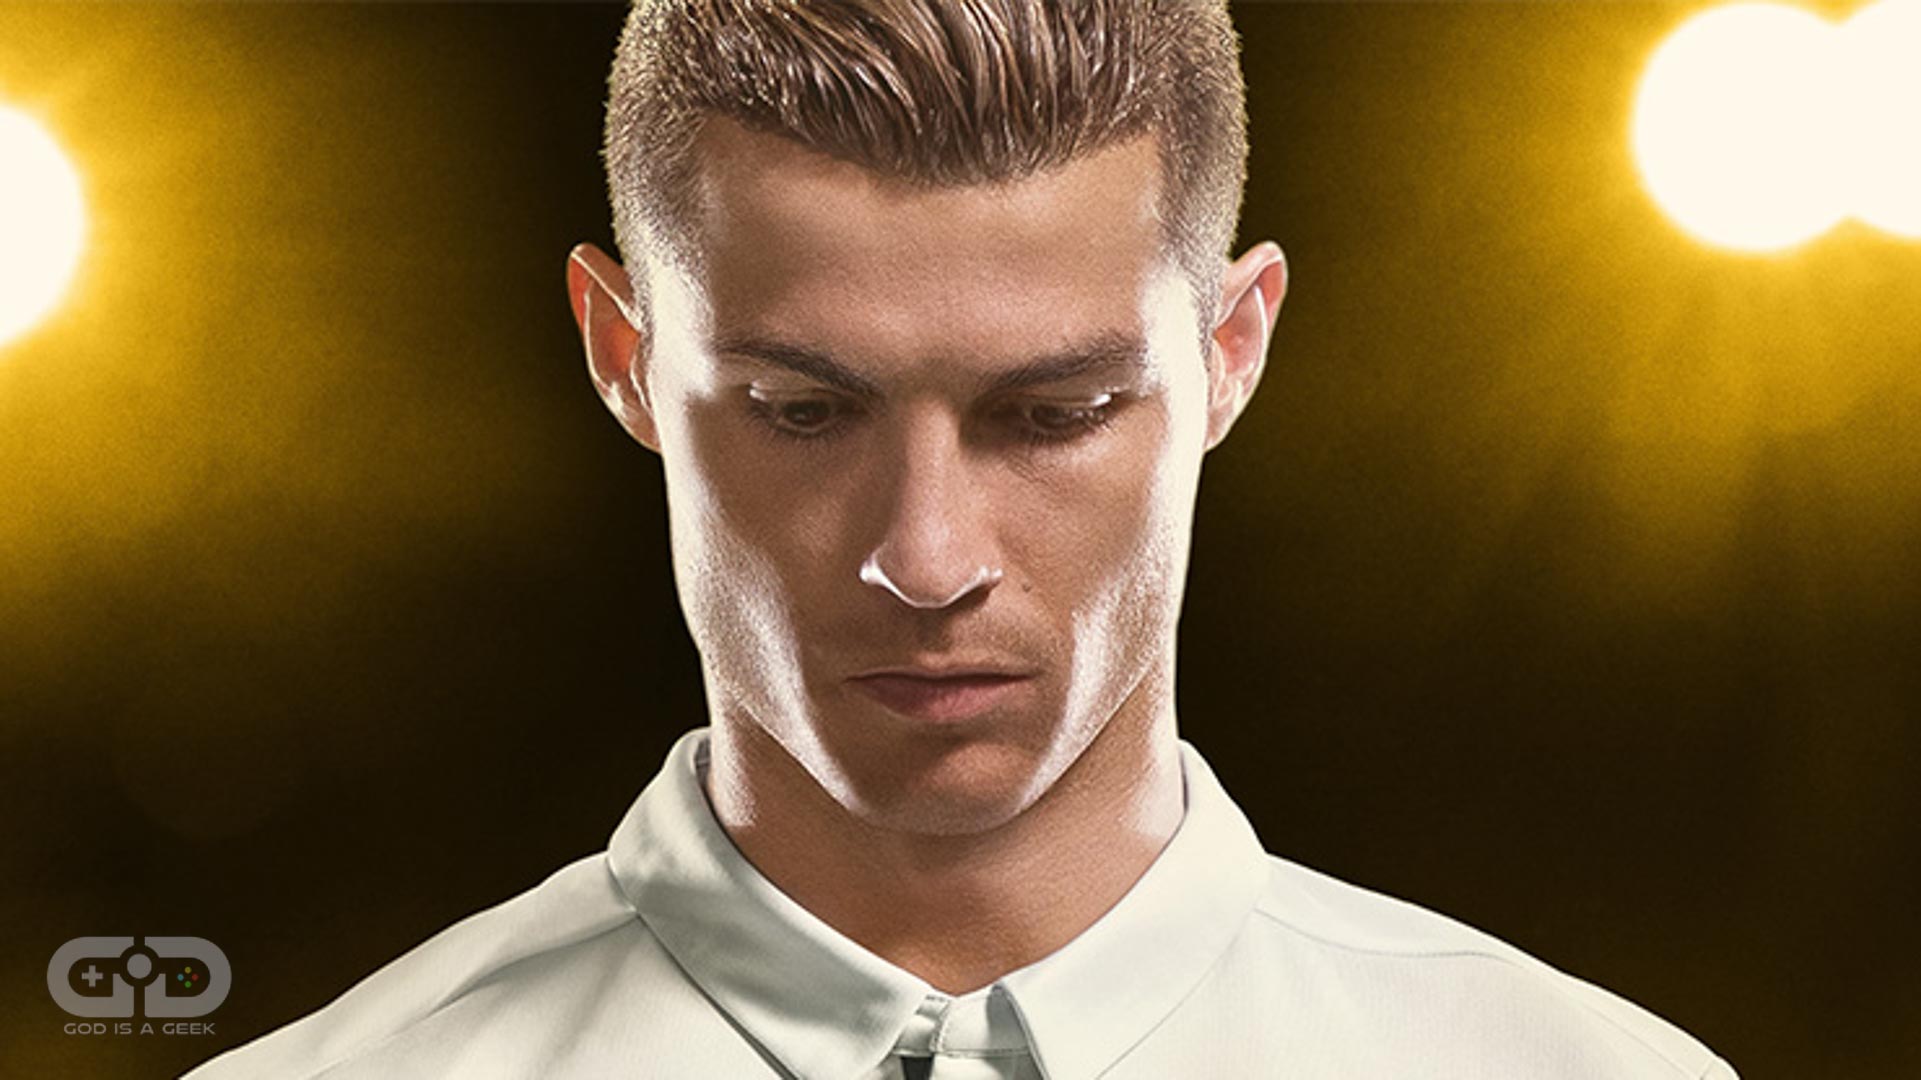 Cristiano is the star in Sports FIFA 18 | GodisaGeek.com